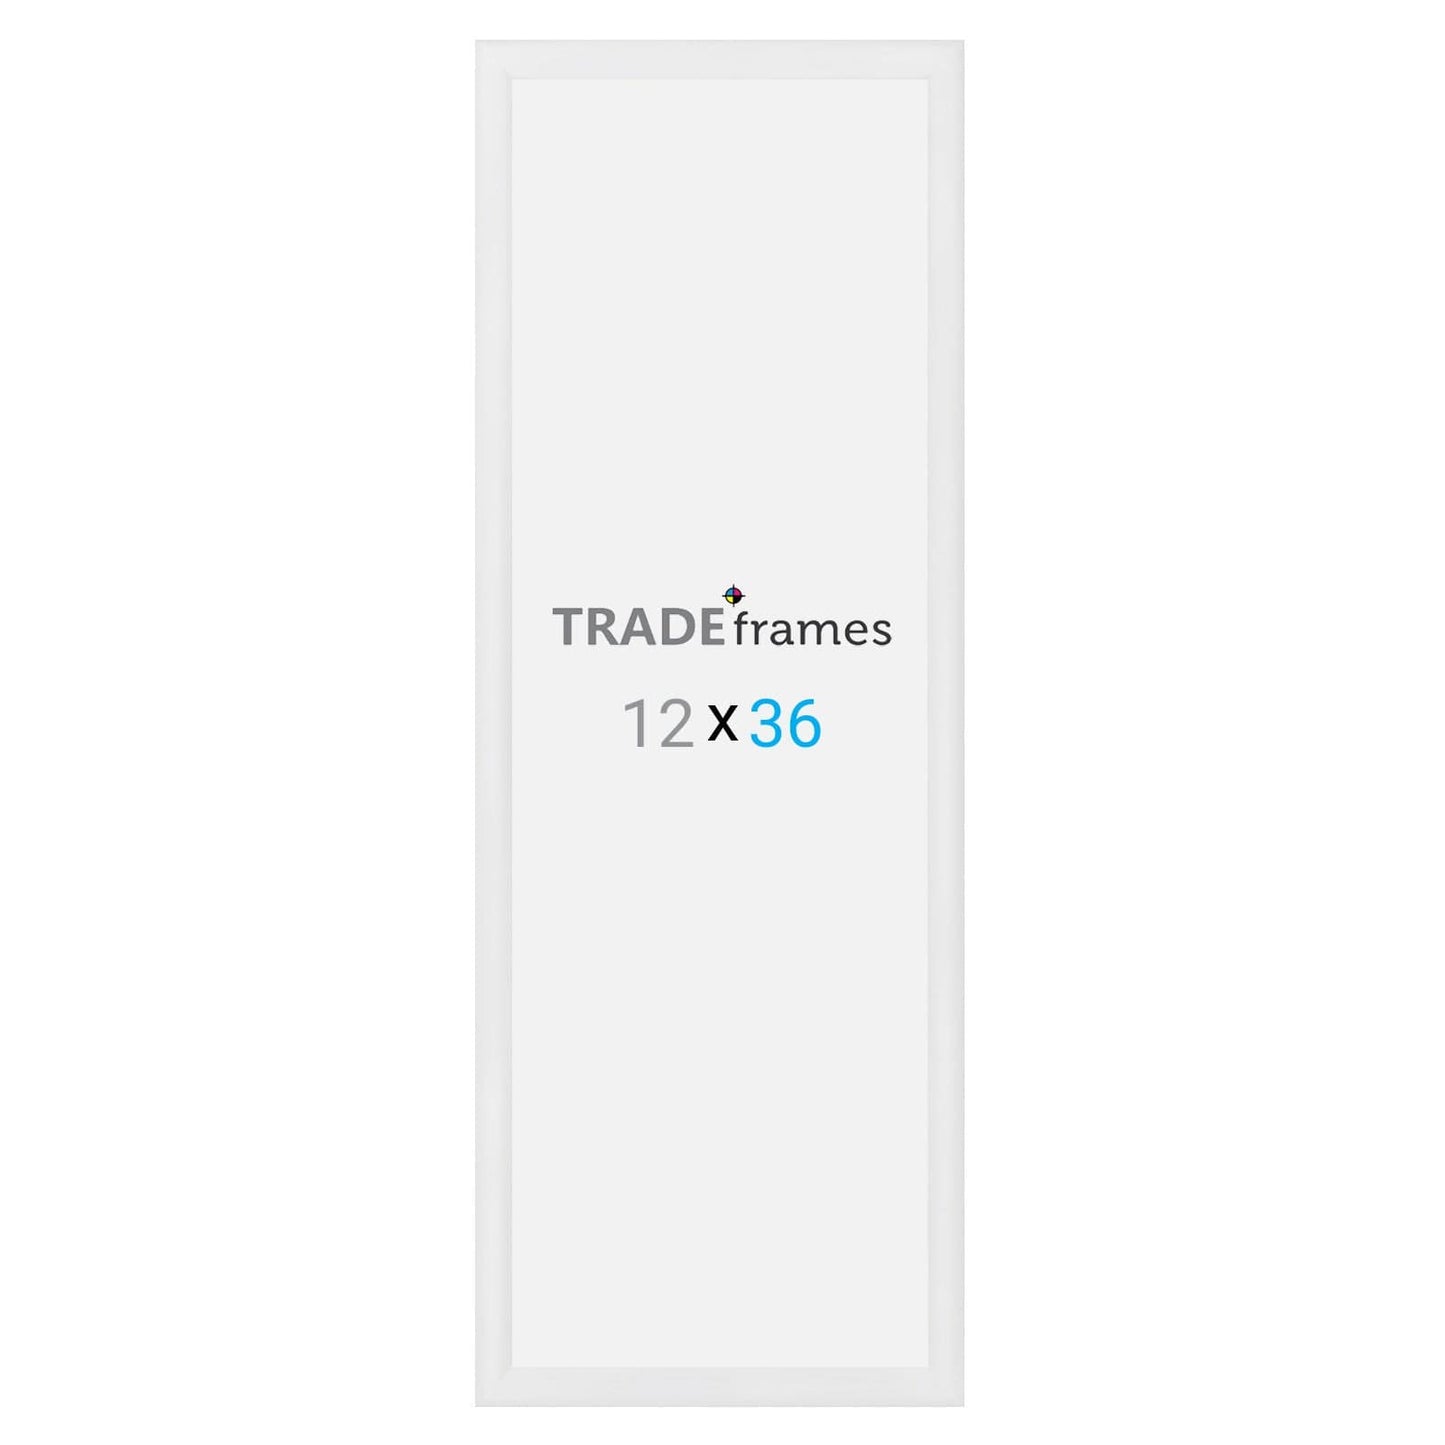 12x36 TRADEframe White Snap Frame 12x36 - 1.2 inch profile - Snap Frames Direct